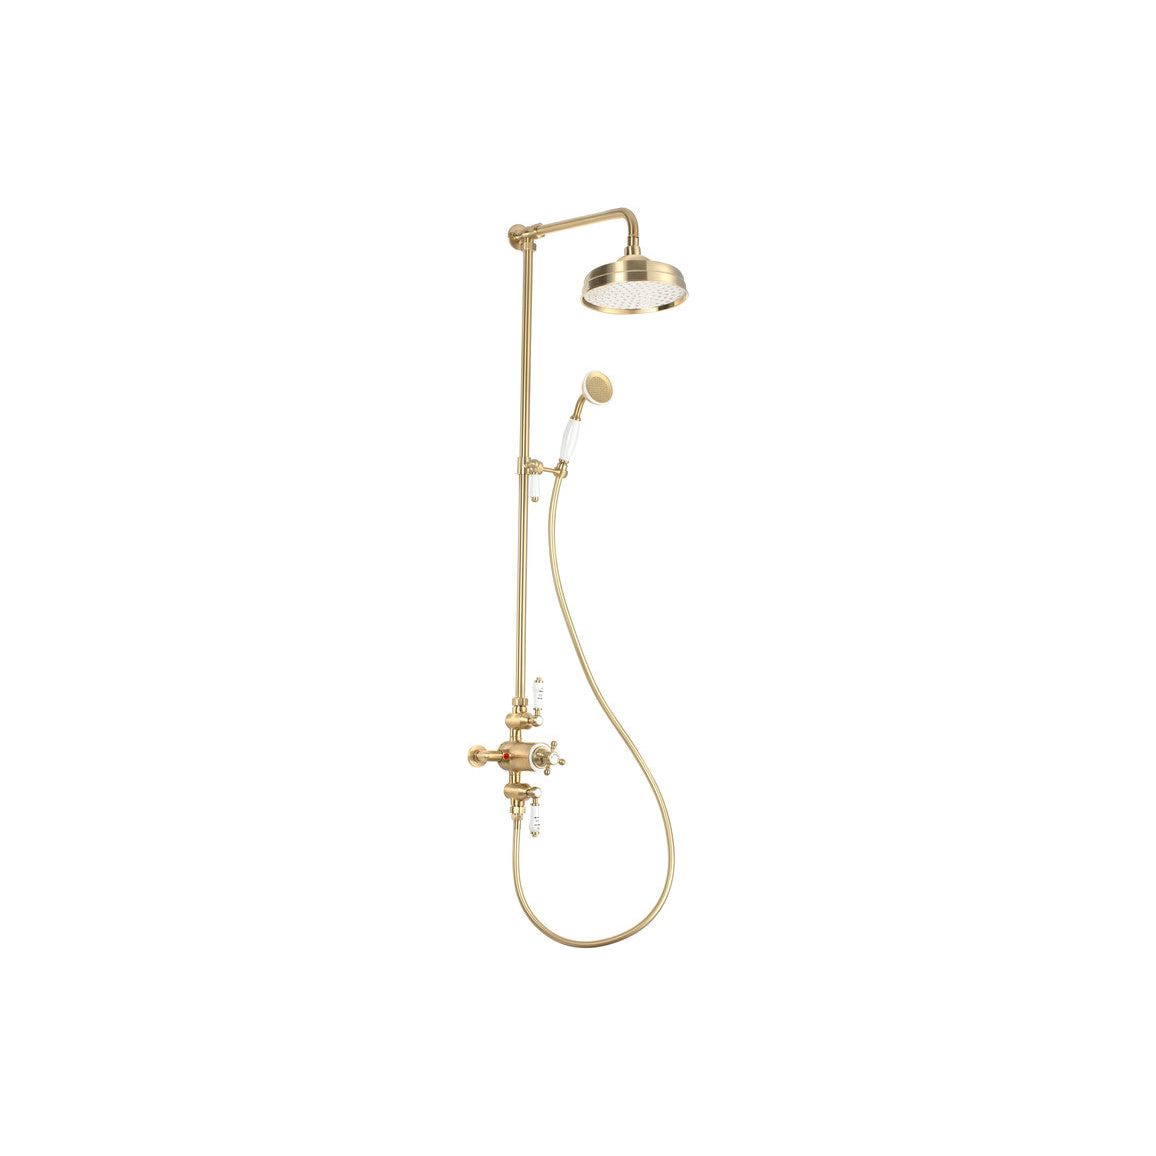 Burchs Thermostatic Shower Kit - Brushed Brass